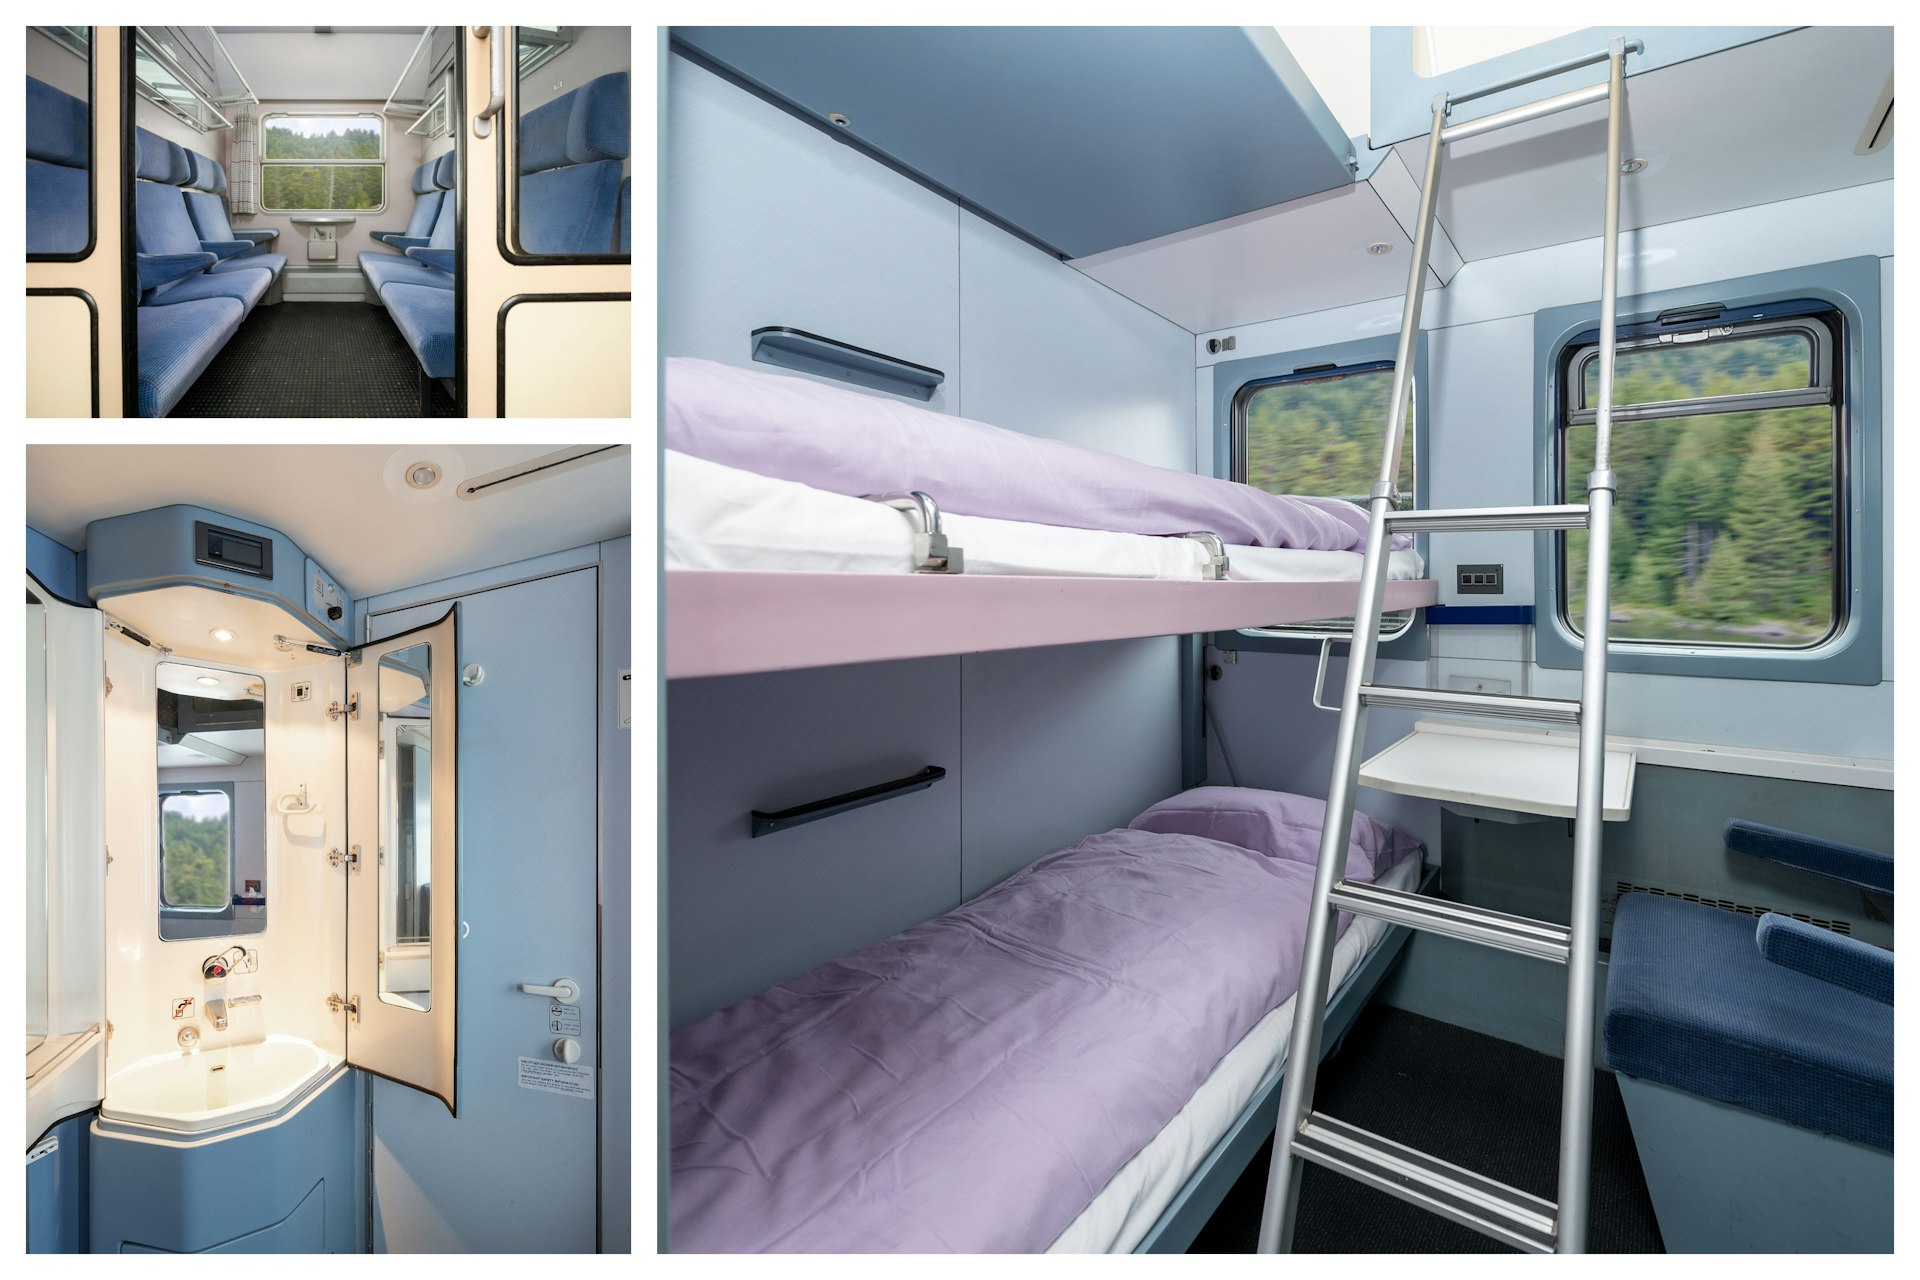 The Good Night Train on-board facilities including bedrooms and bathrooms